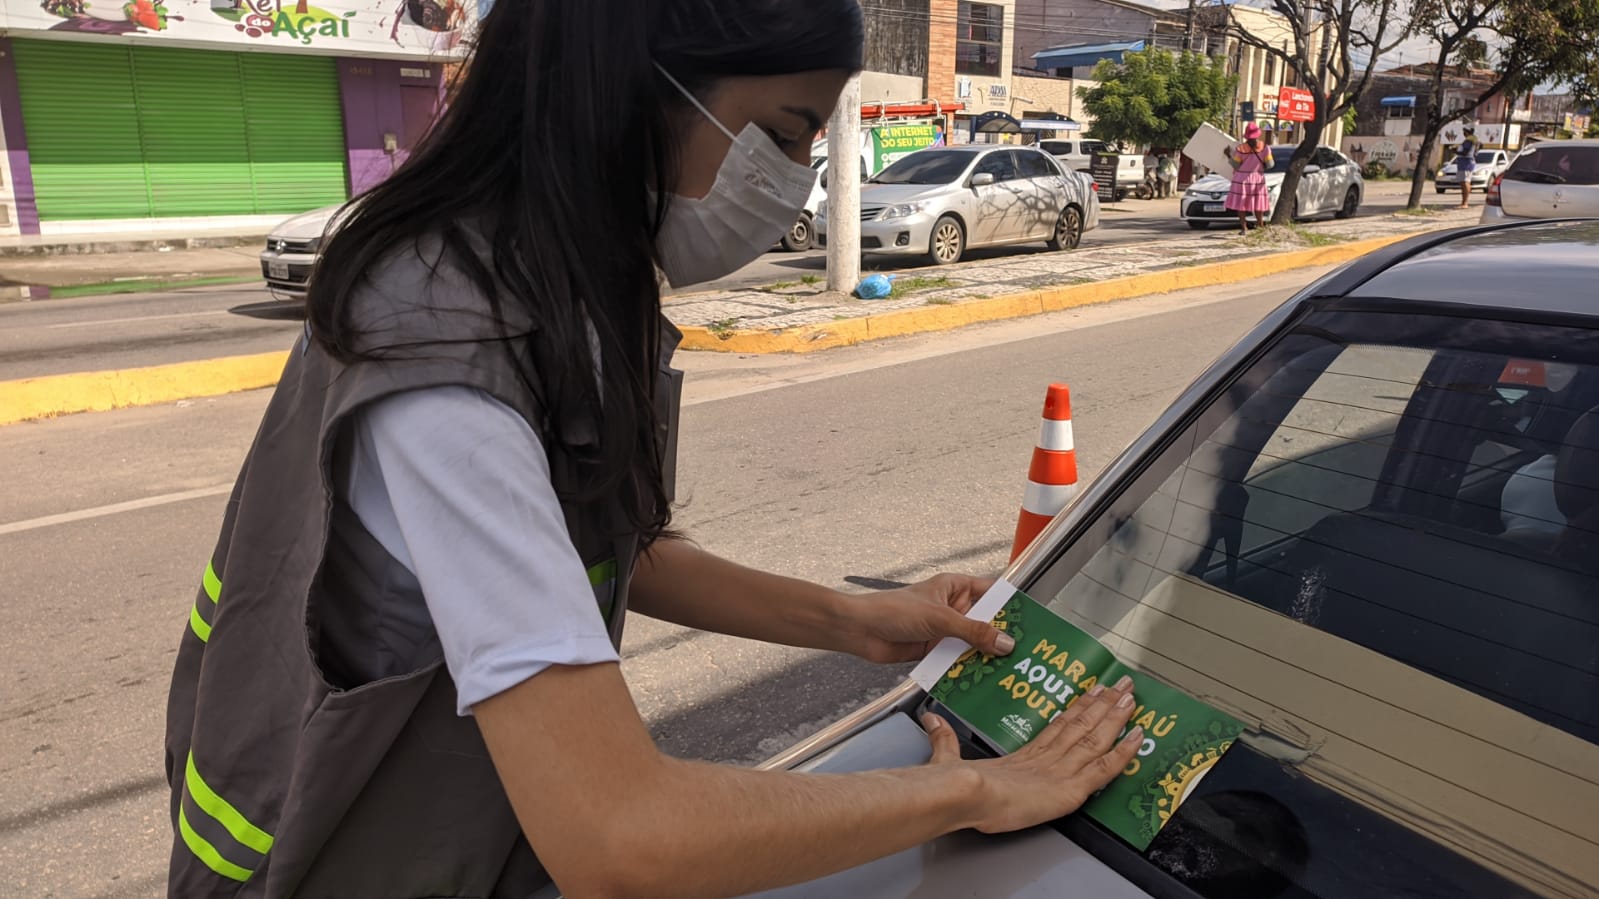 You are currently viewing Junho Ambiental 2022 realiza blitz educativa